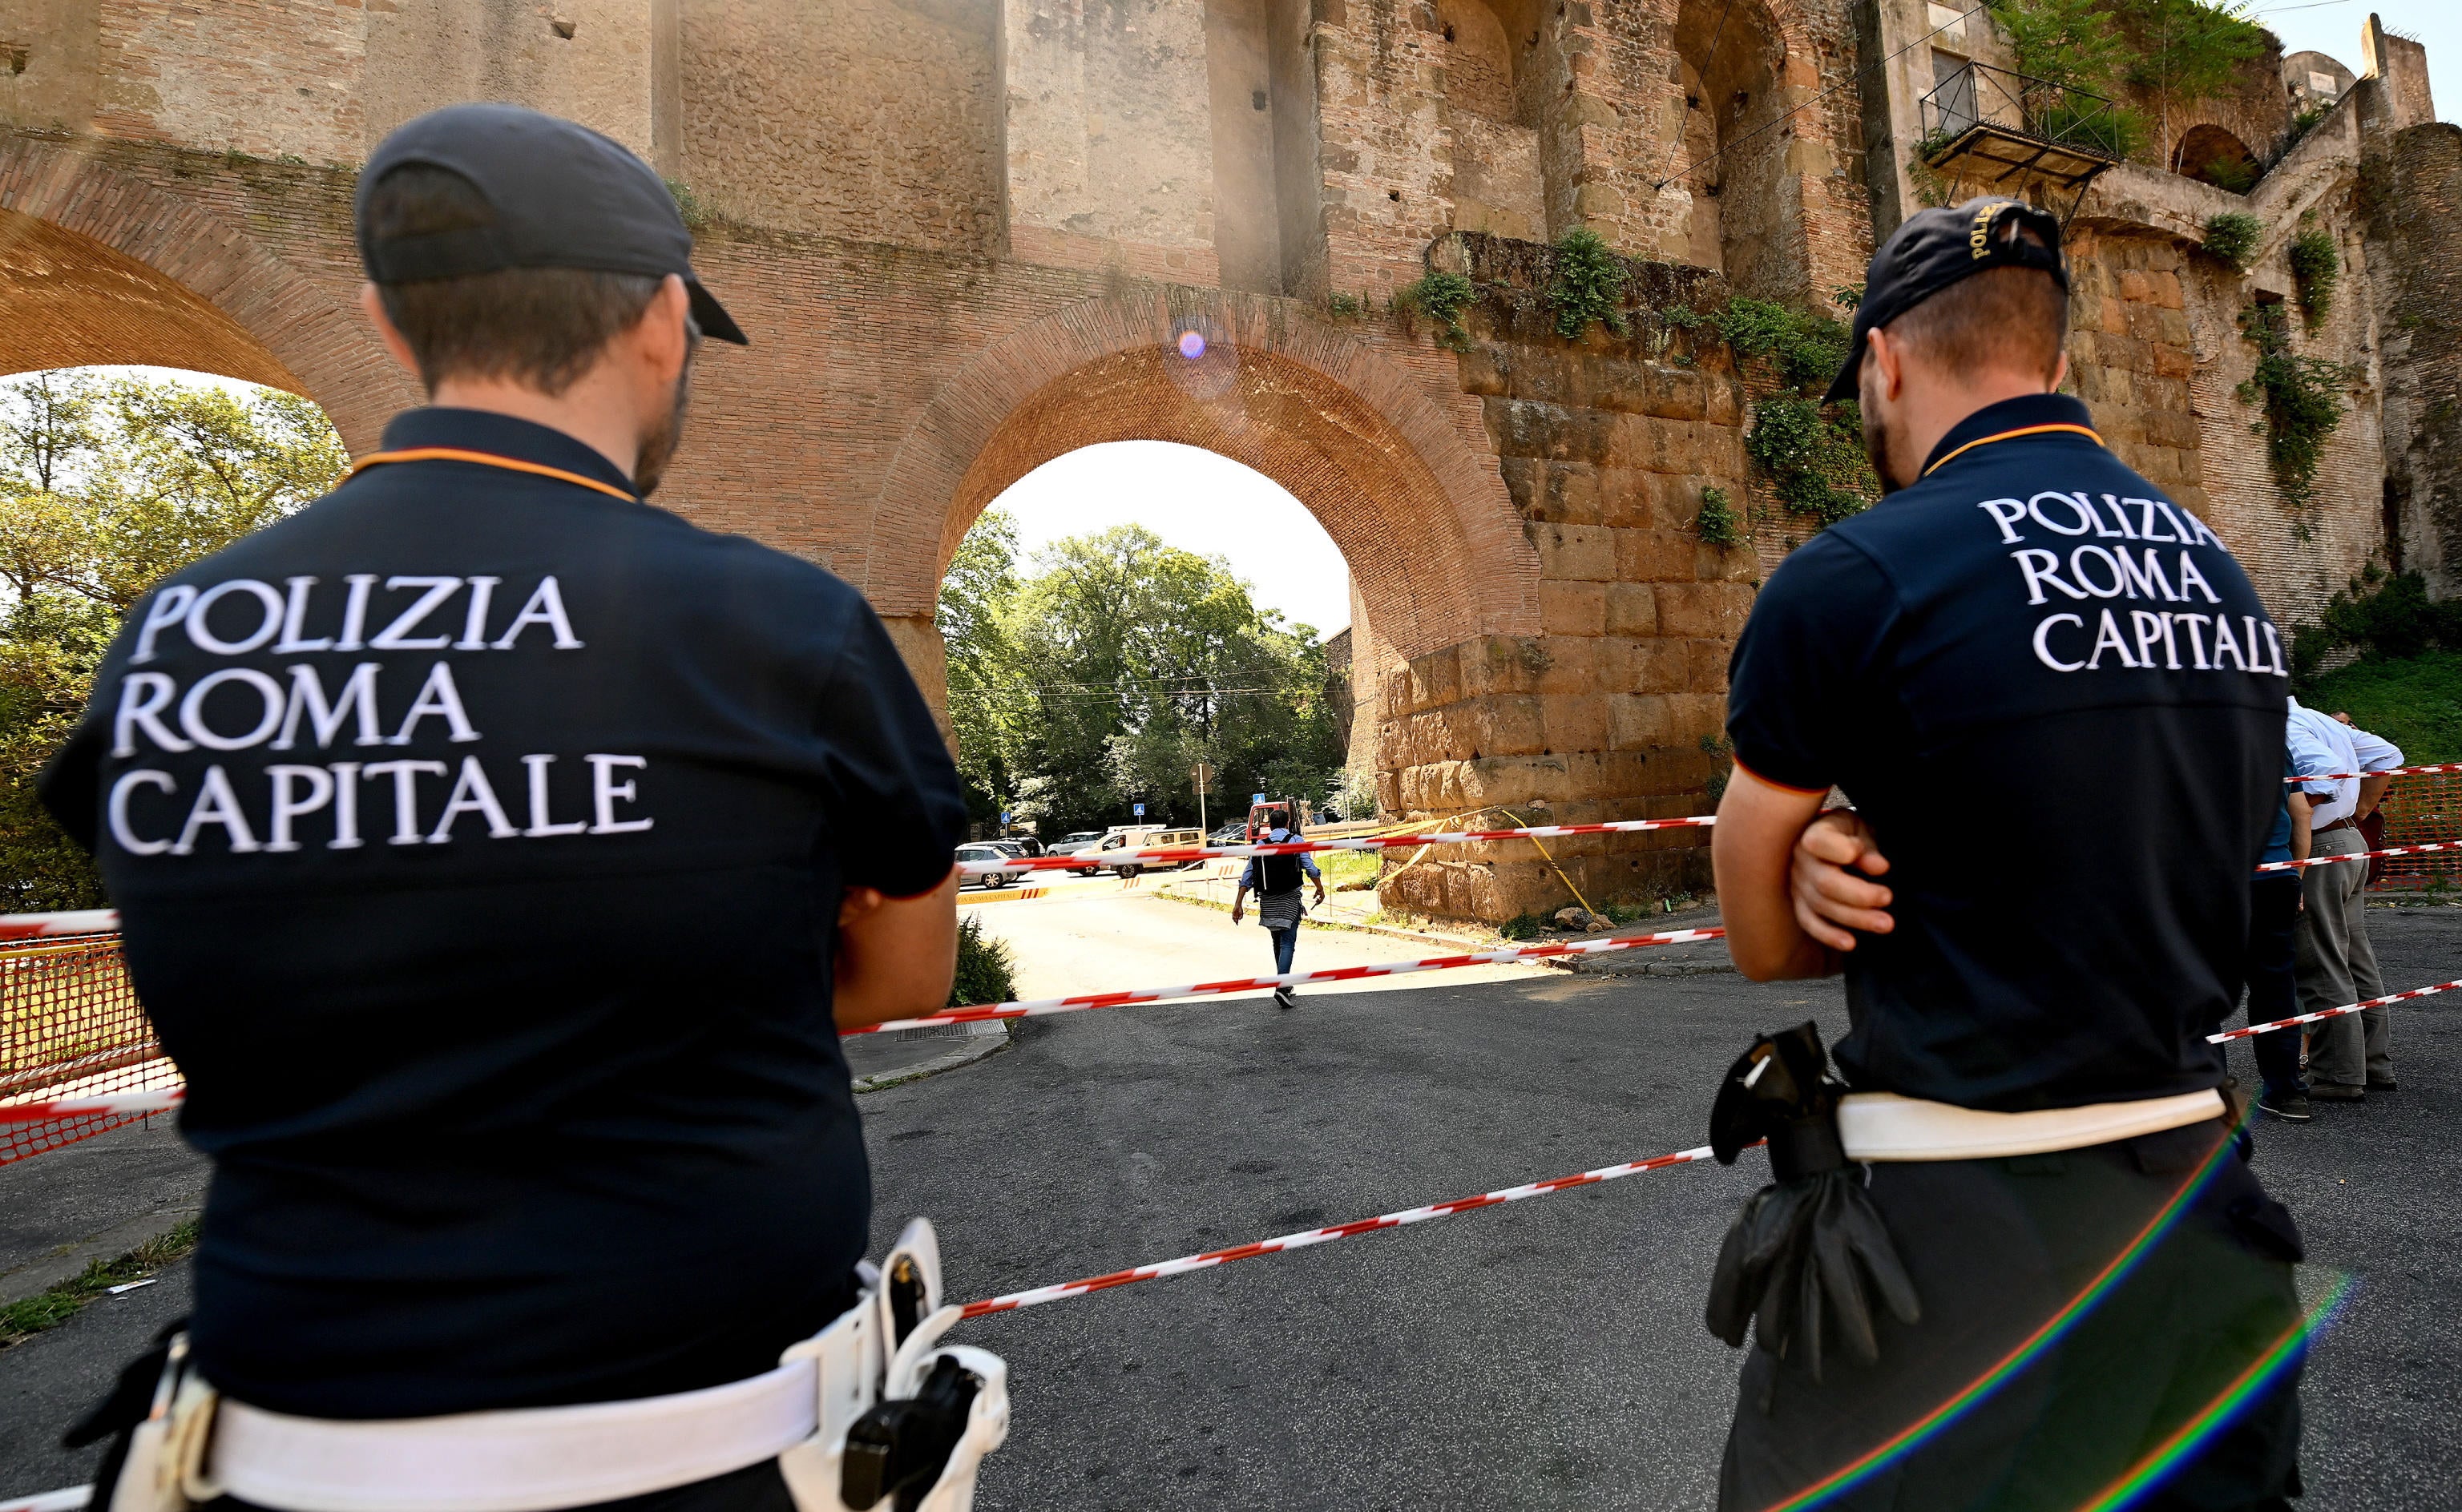 Mismanagement problems have plagued the Italian capital for years, angering Romans and often shocking tourists